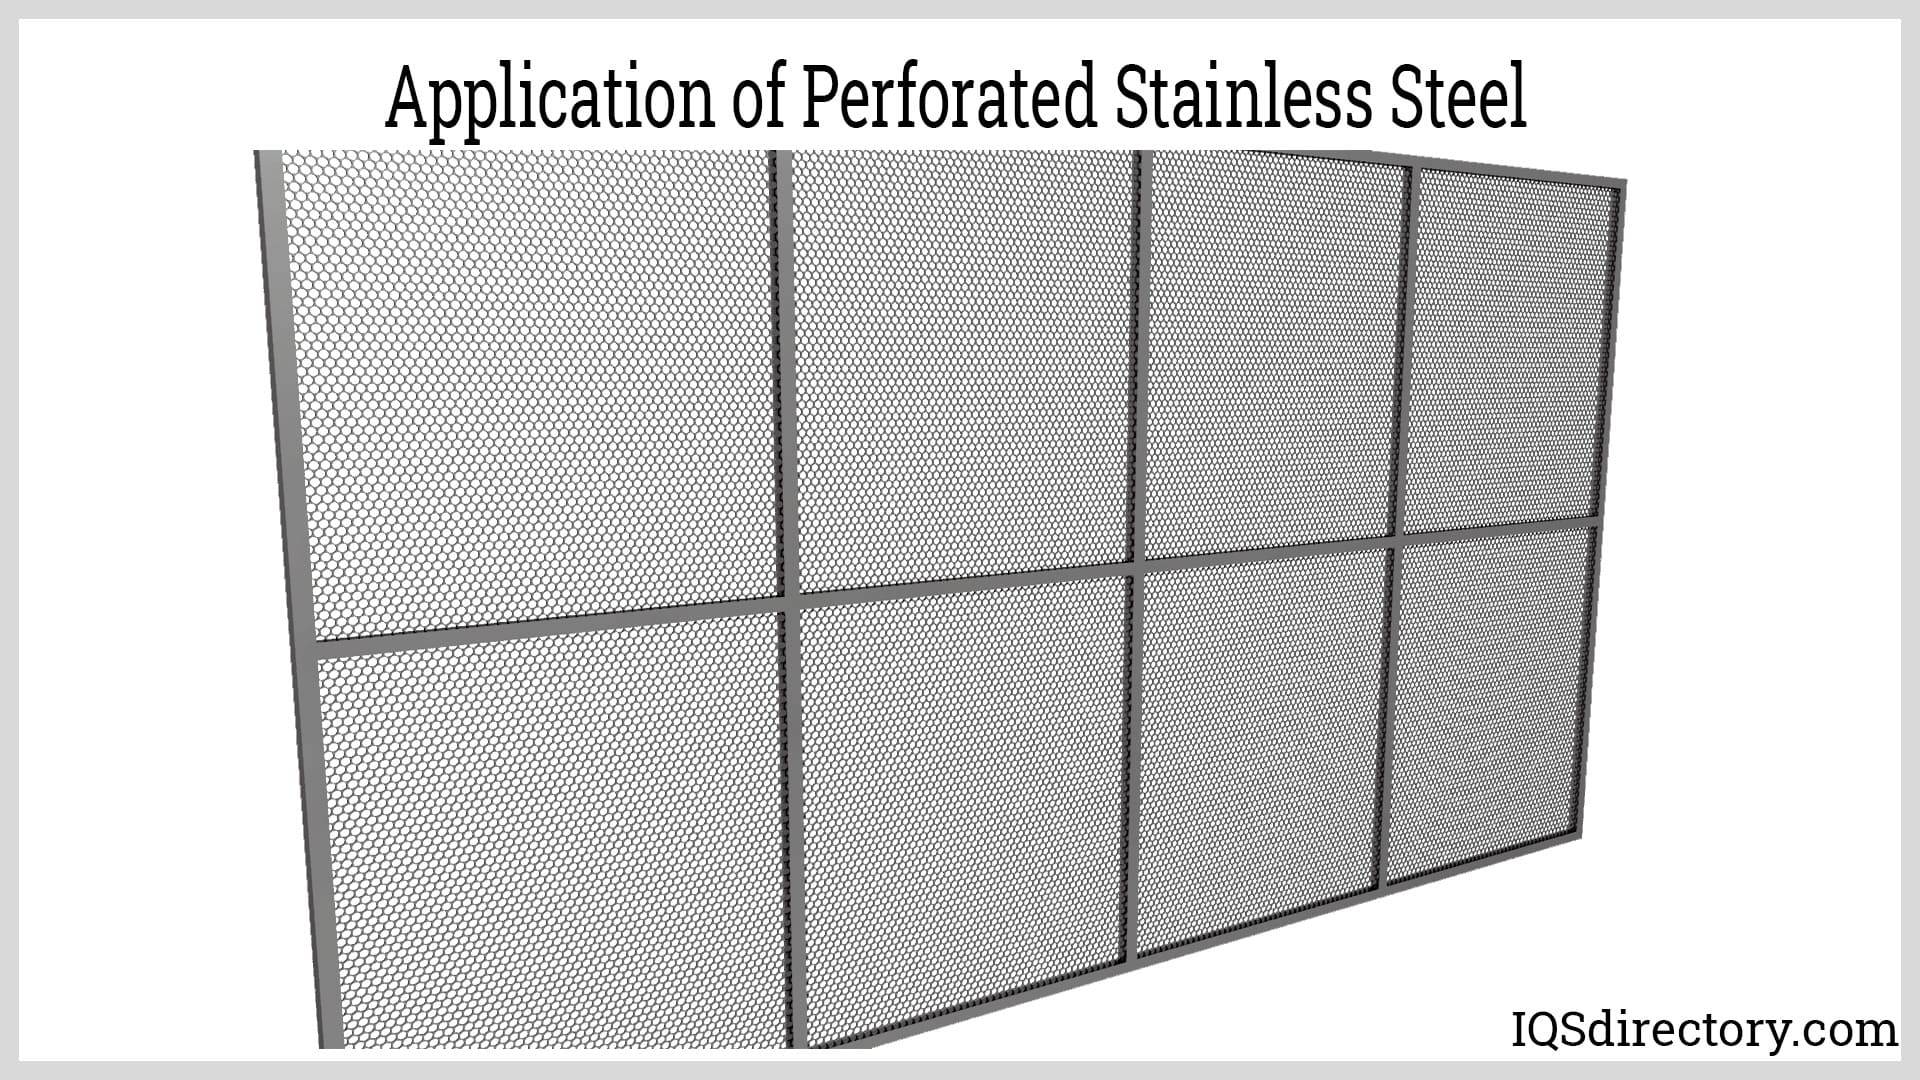 Application of Perforated Stainless Steel